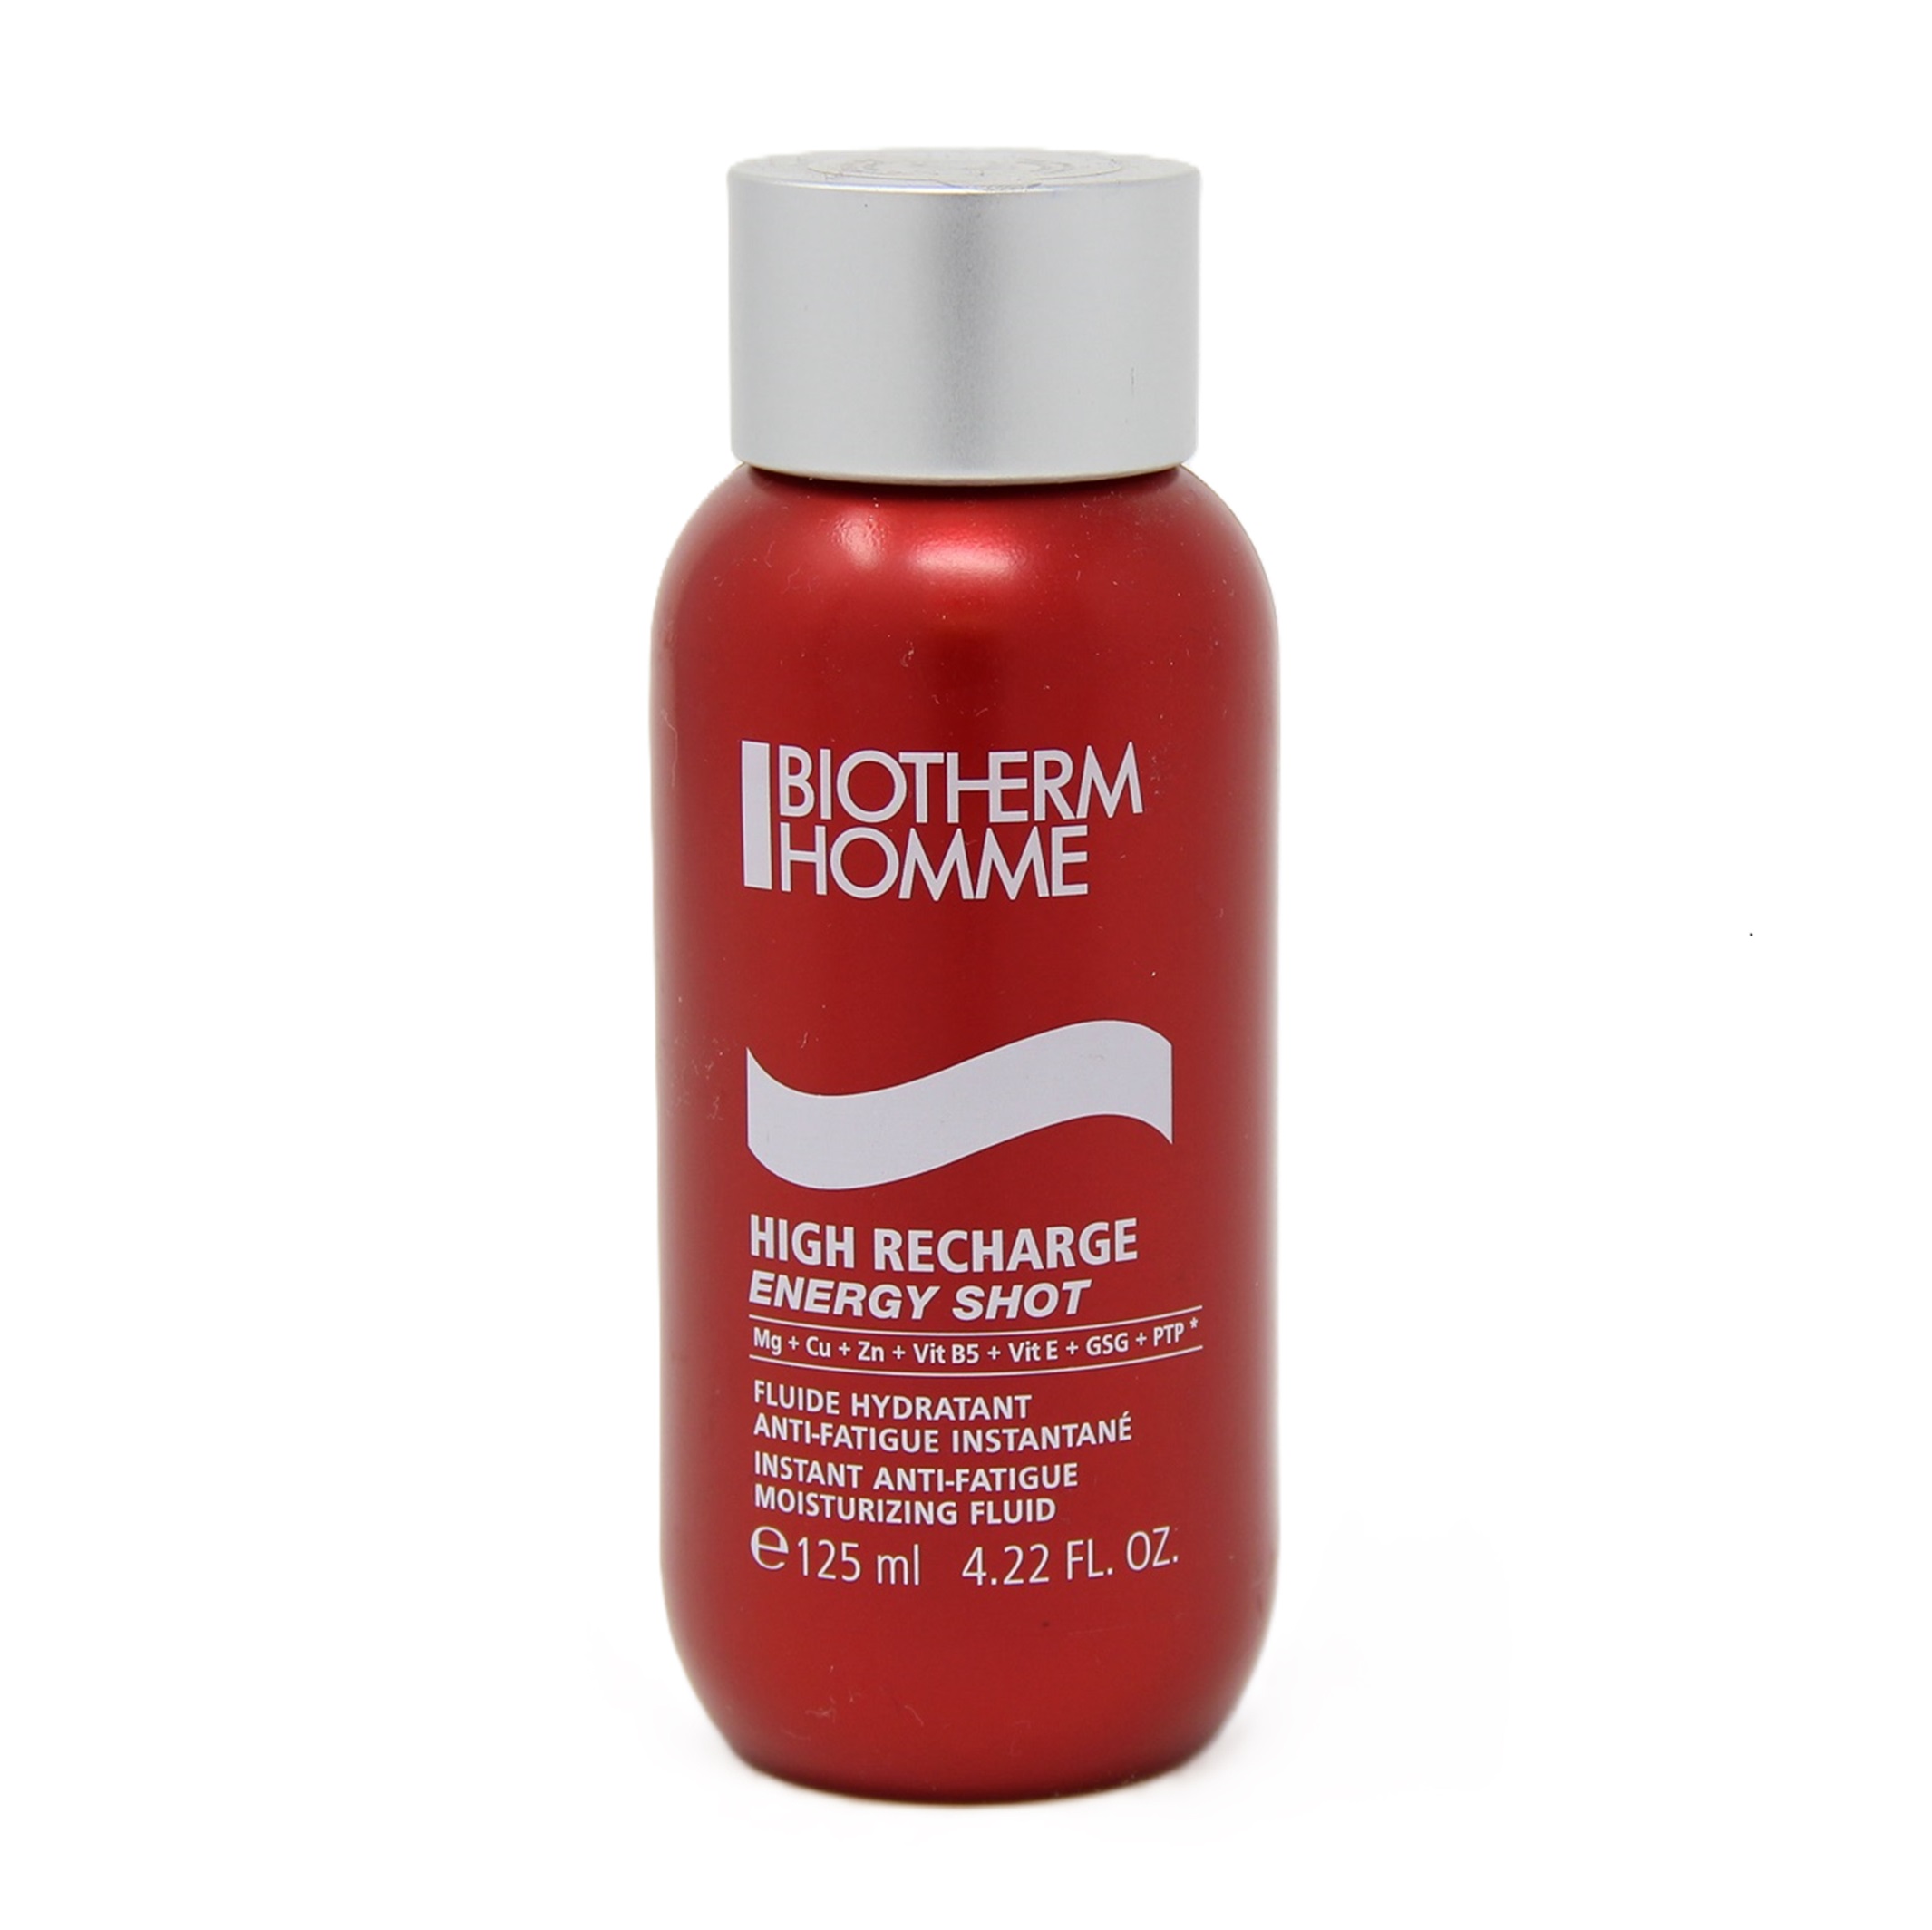 Biotherm Homme High Recharge Energy Shot Hydra. Anti-Müdigkeits-Fluid 125ml